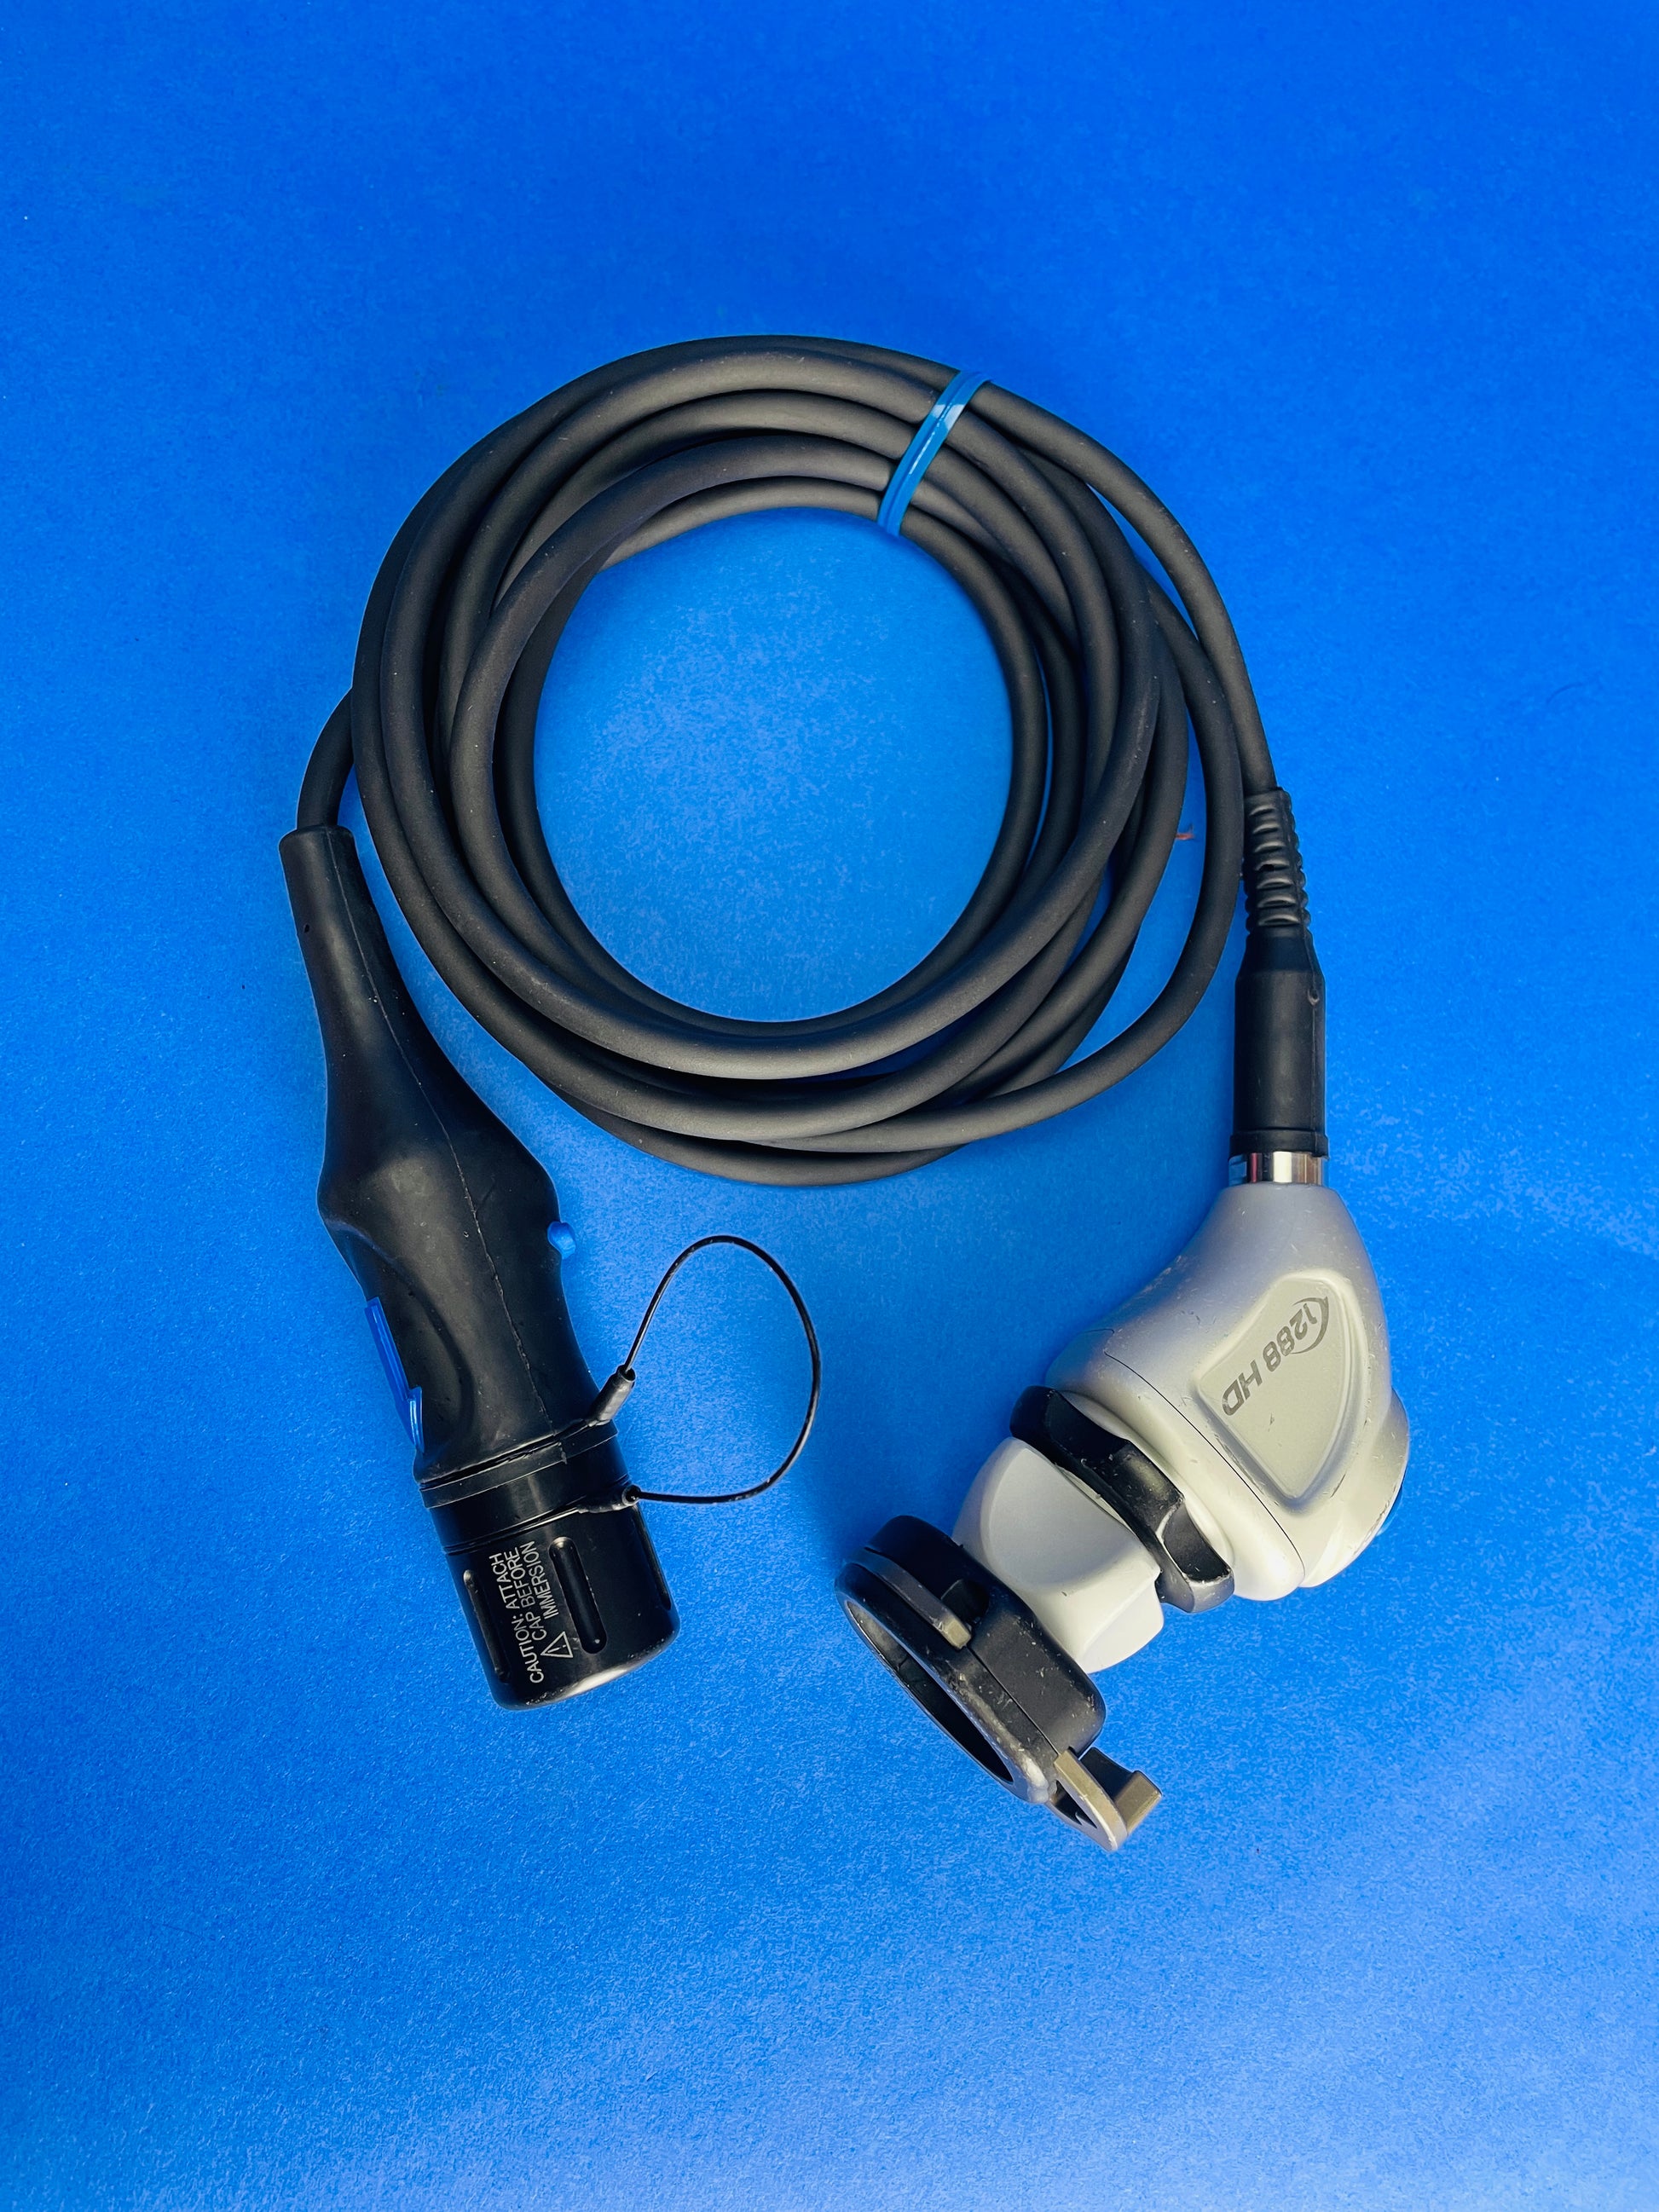 Stryker 1288 HD 3-Chip Endoscopic Camera is in excellent condition 